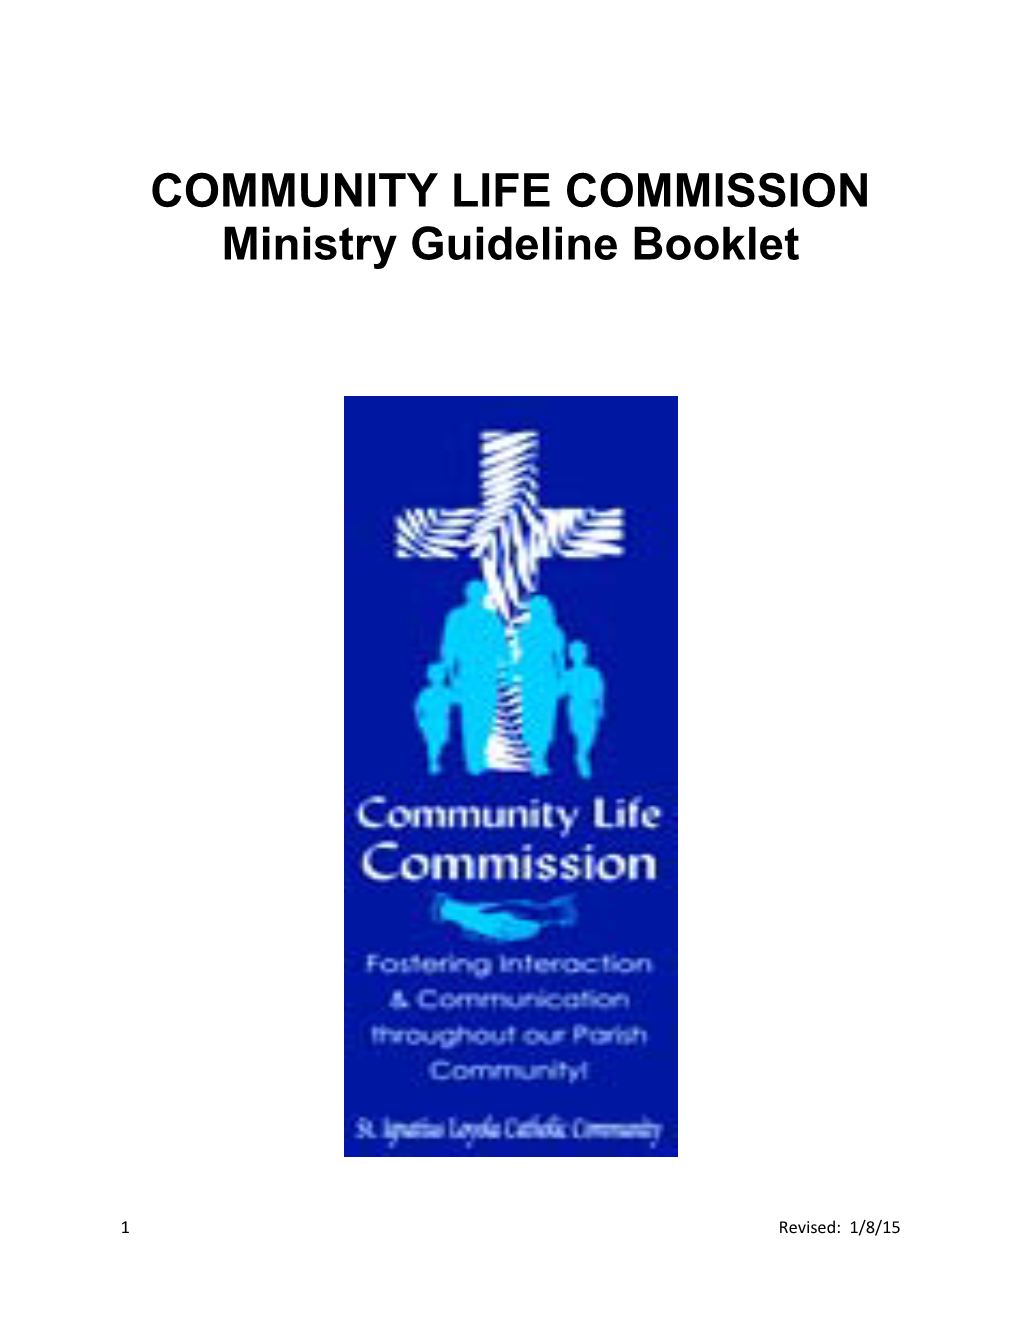 COMMUNITY LIFE COMMISSION Ministry Guideline Booklet